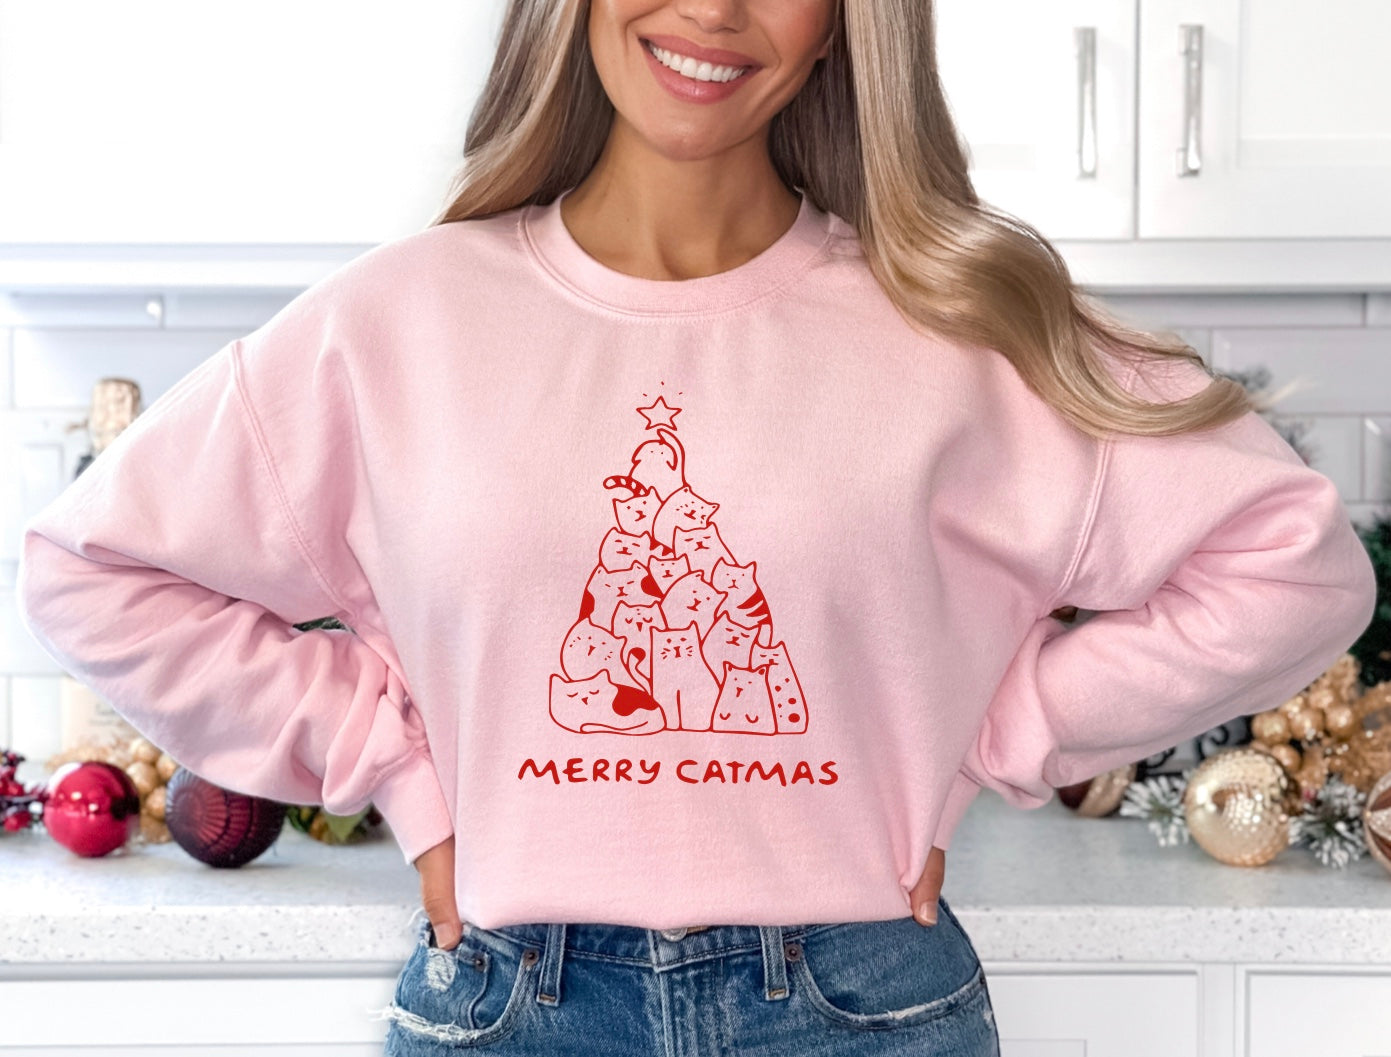 Merry Catmas unisex crewneck sweatshirt in pink with red graphic